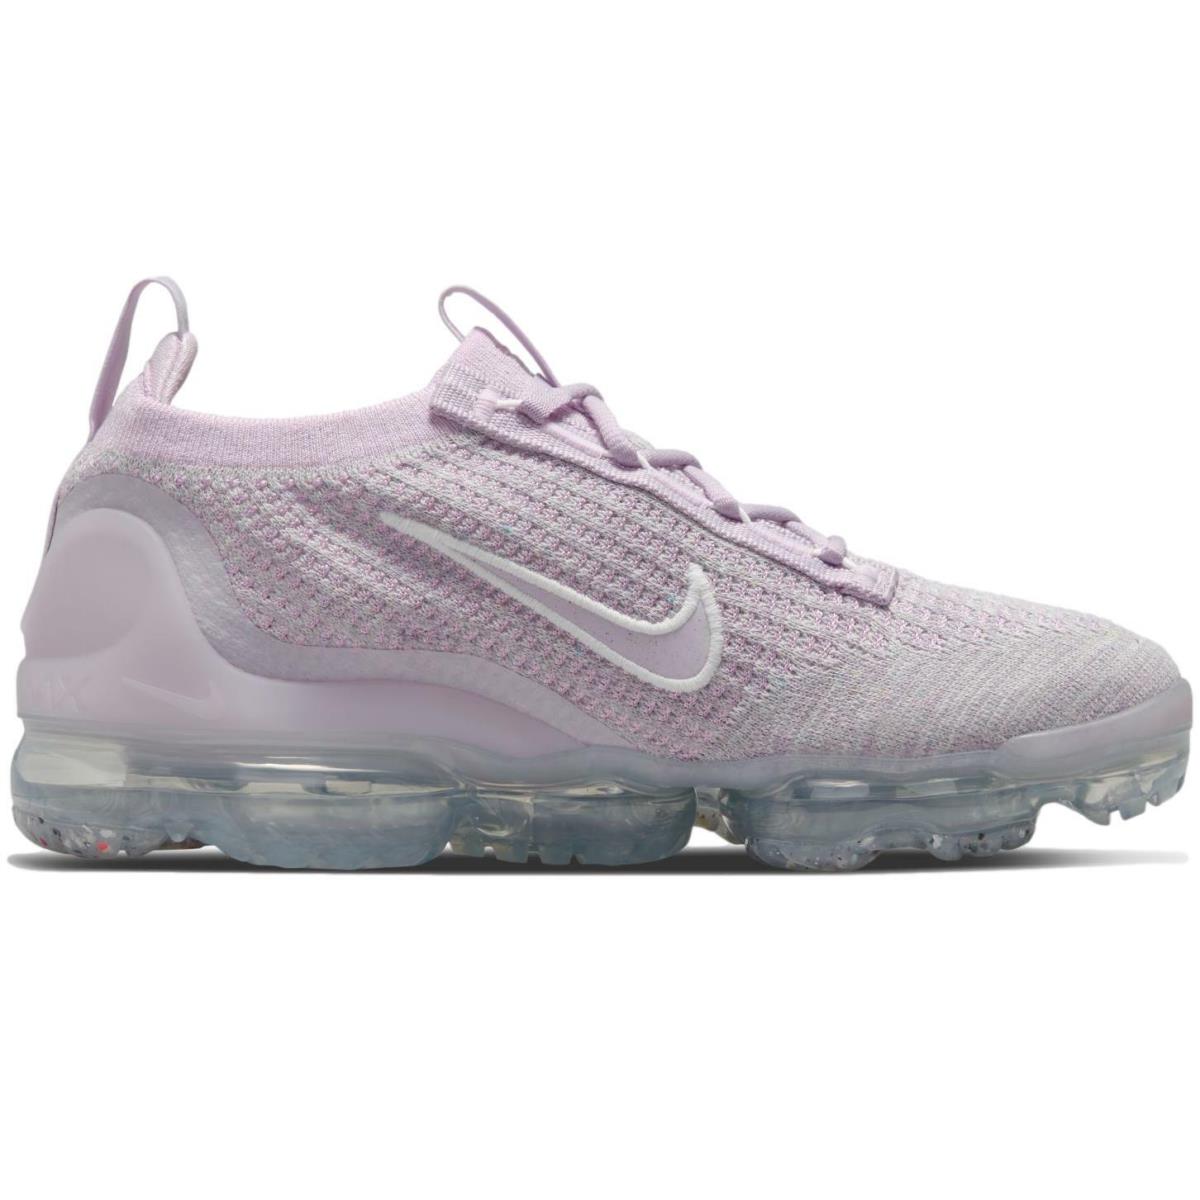 Nike shoes Air Vapormax Flyknit - Light Arctic Pink/Iced Lilac 2